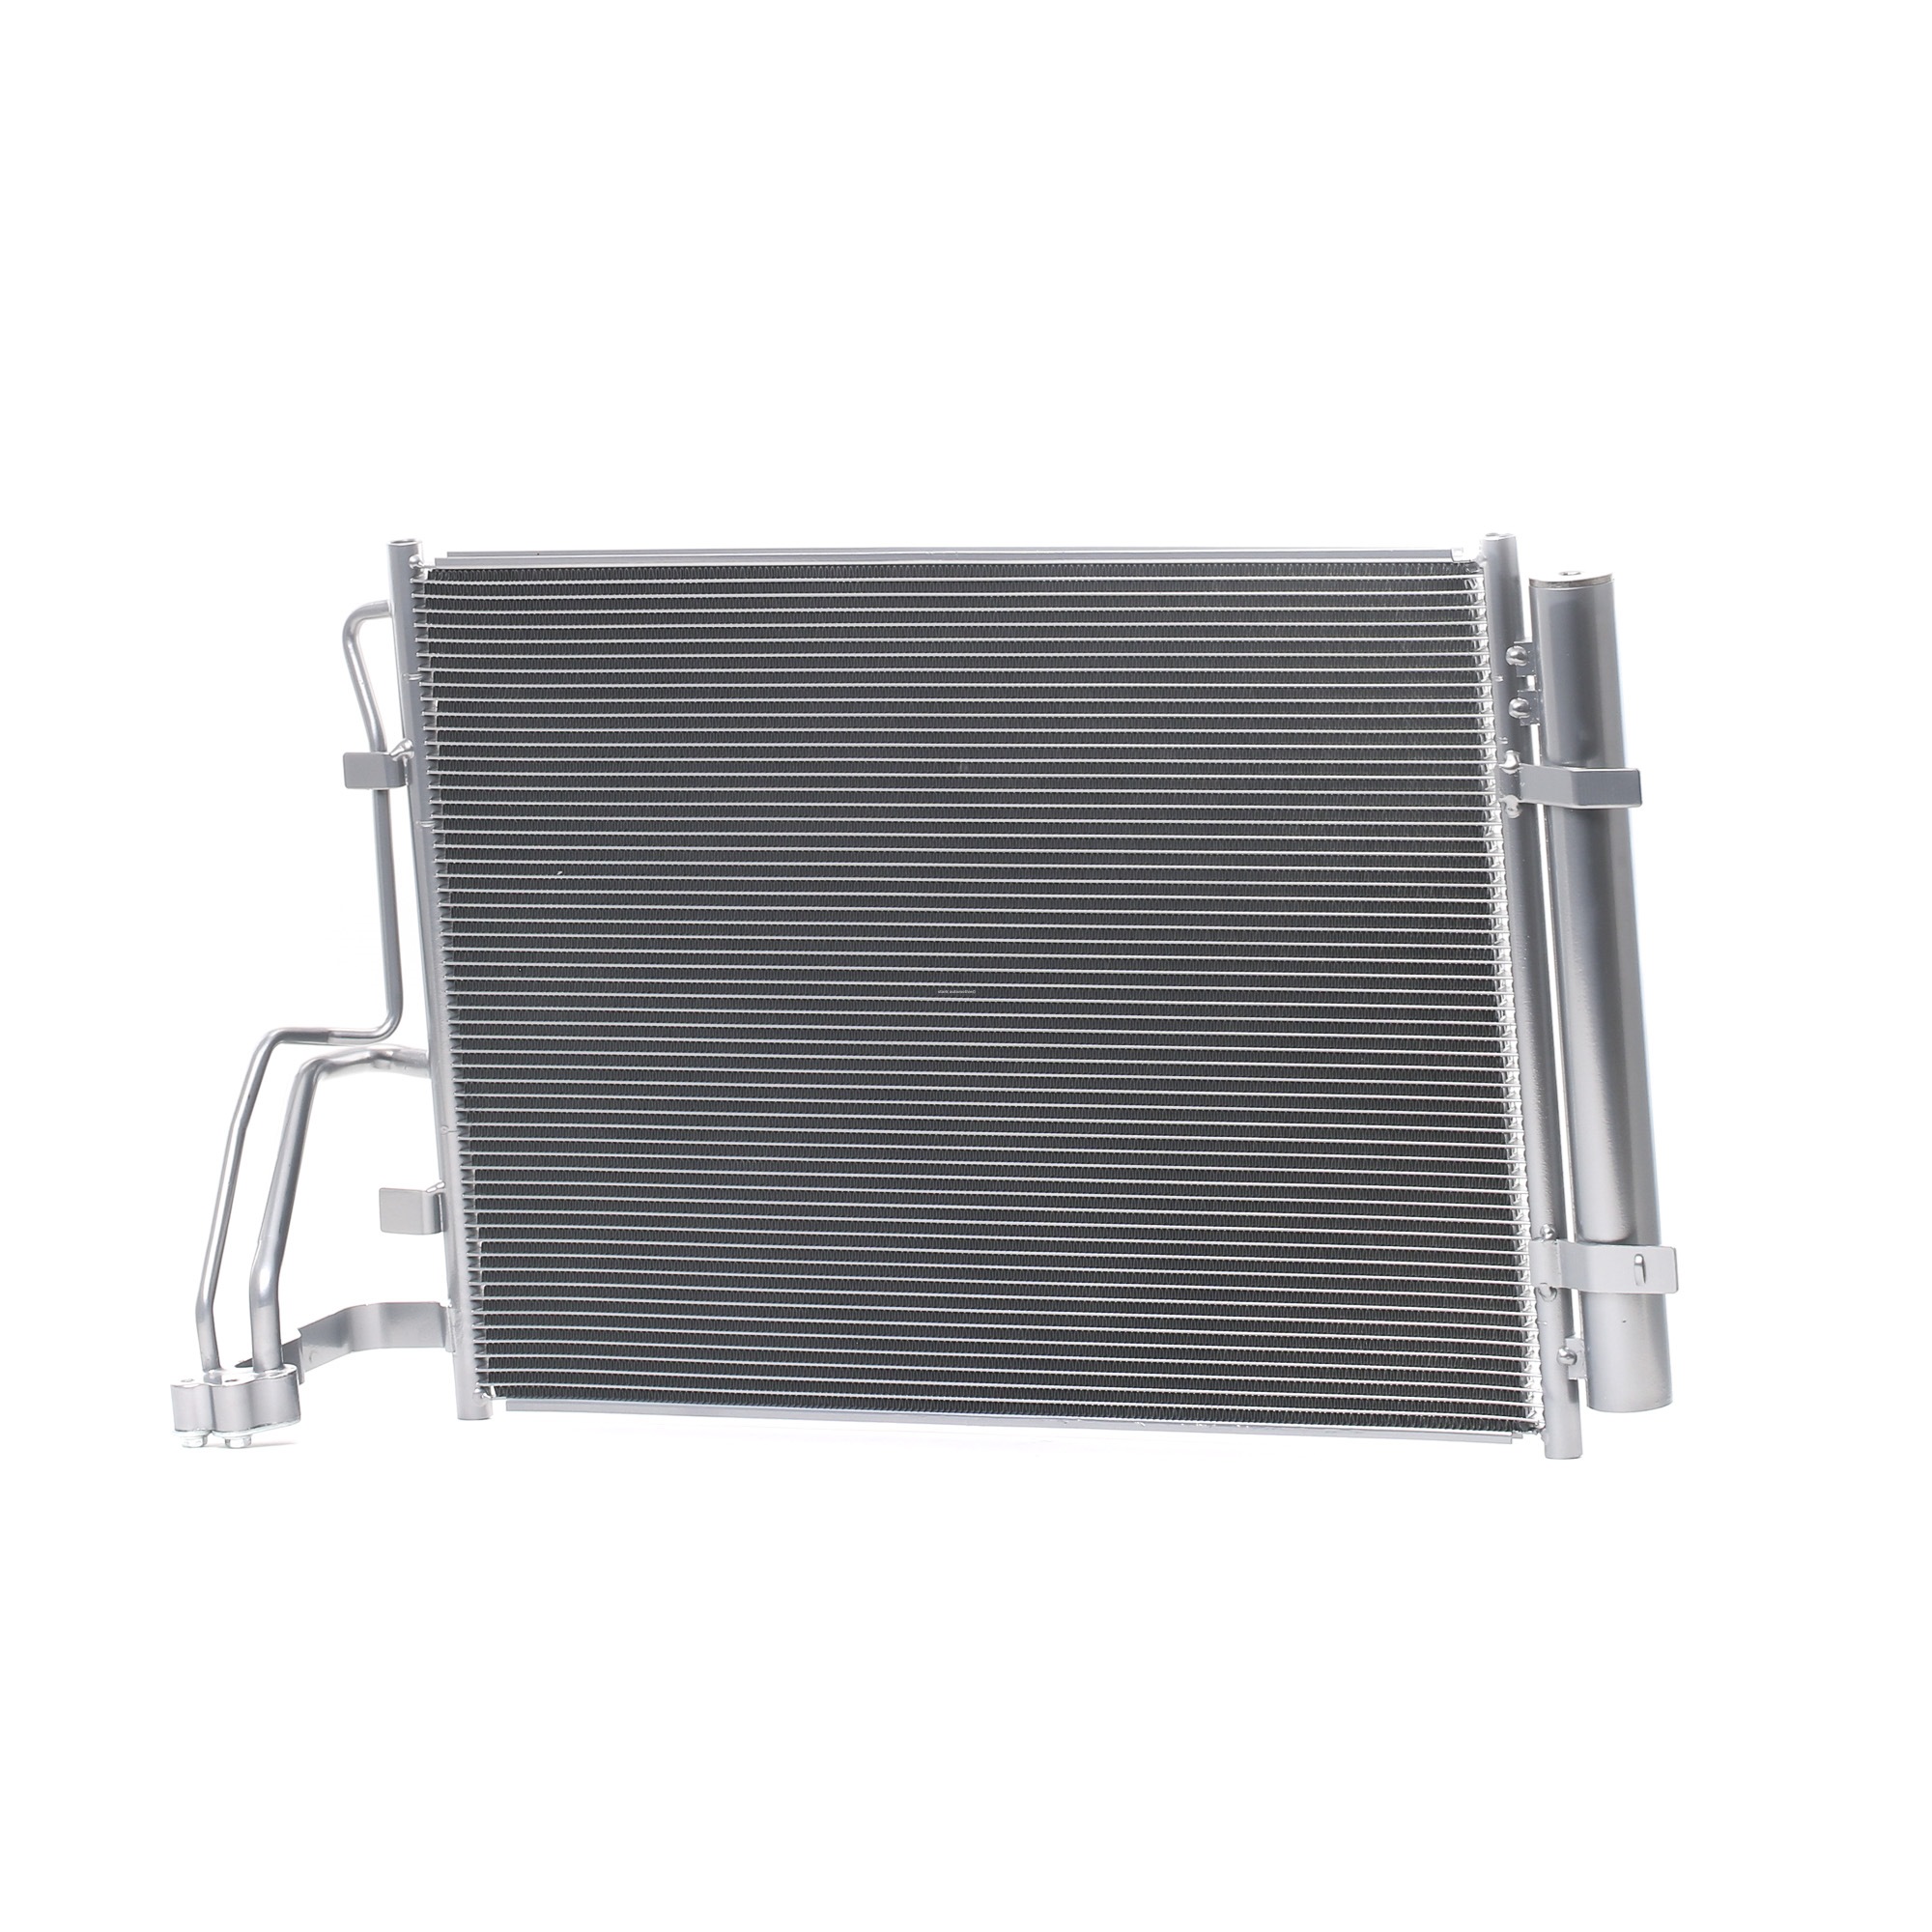 STARK SKCD-0110572 Air conditioning condenser with dryer, 13,0mm, 8,4mm, Aluminium, R 134a, 370mm